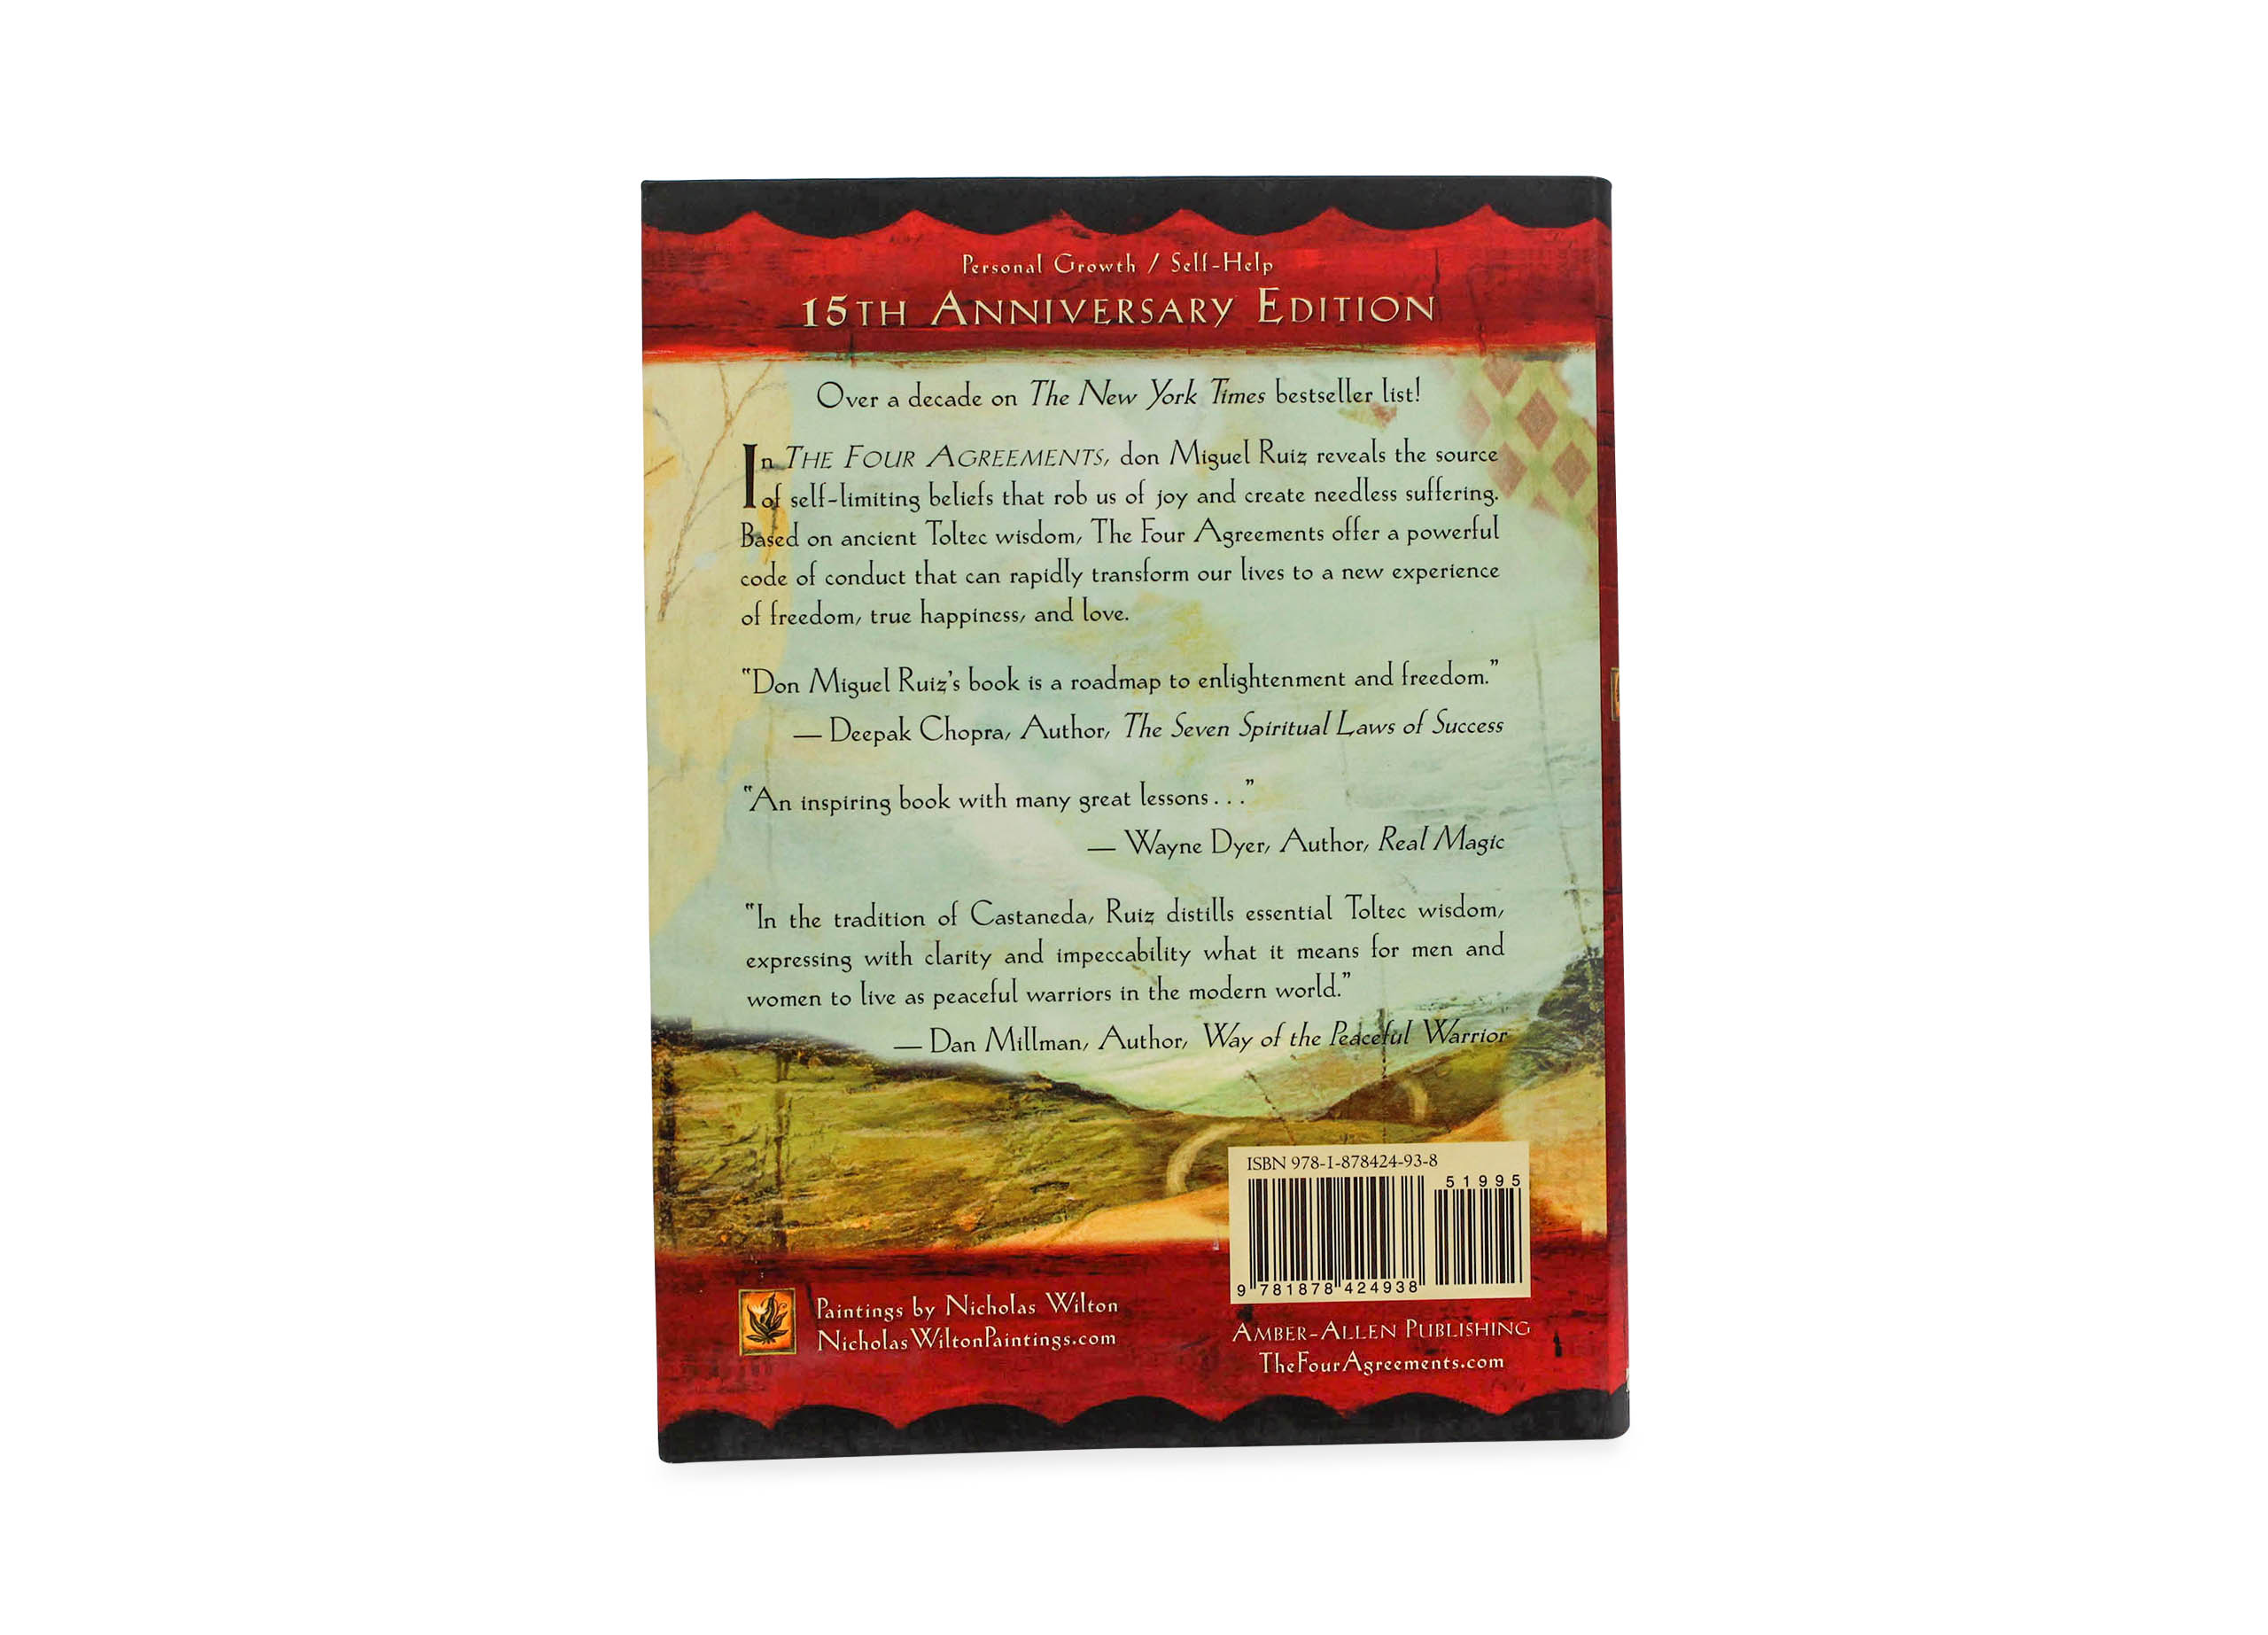 The Four Agreements (Illustrated Version) Book - Crystal Dreams